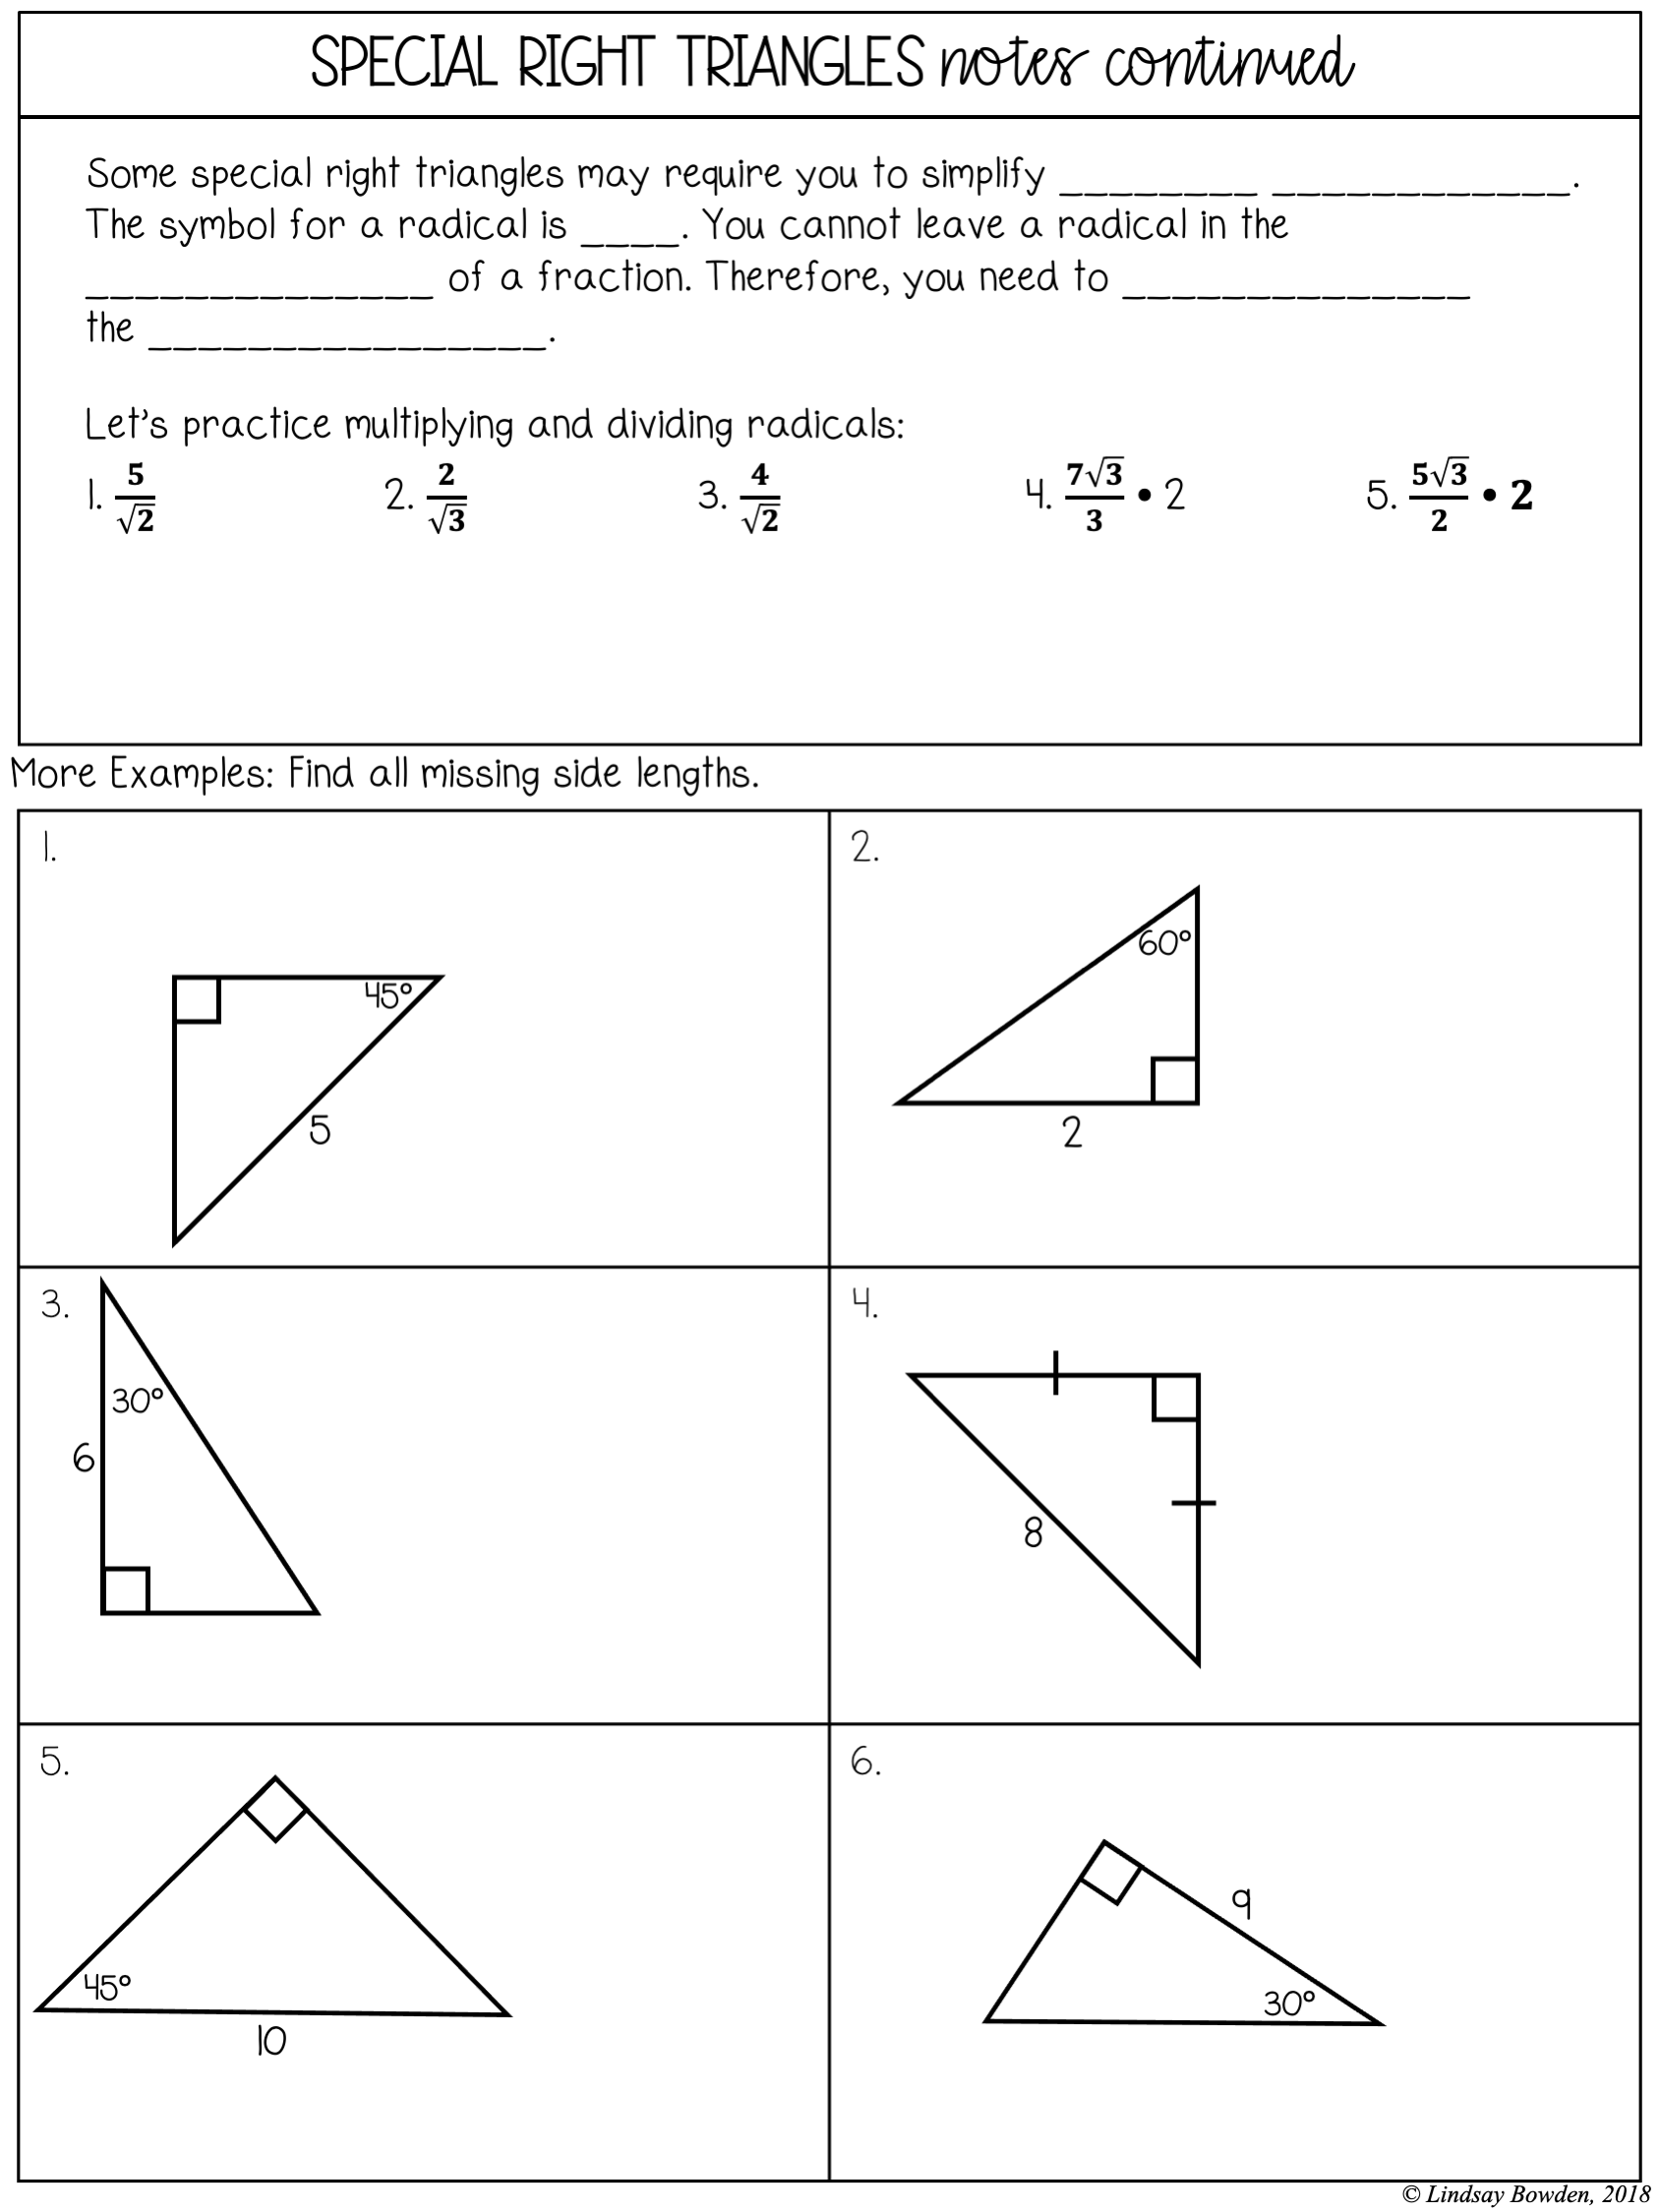 Special Right Triangles Notes and Worksheets - Lindsay Bowden Inside 5 8 Special Right Triangles Worksheet%